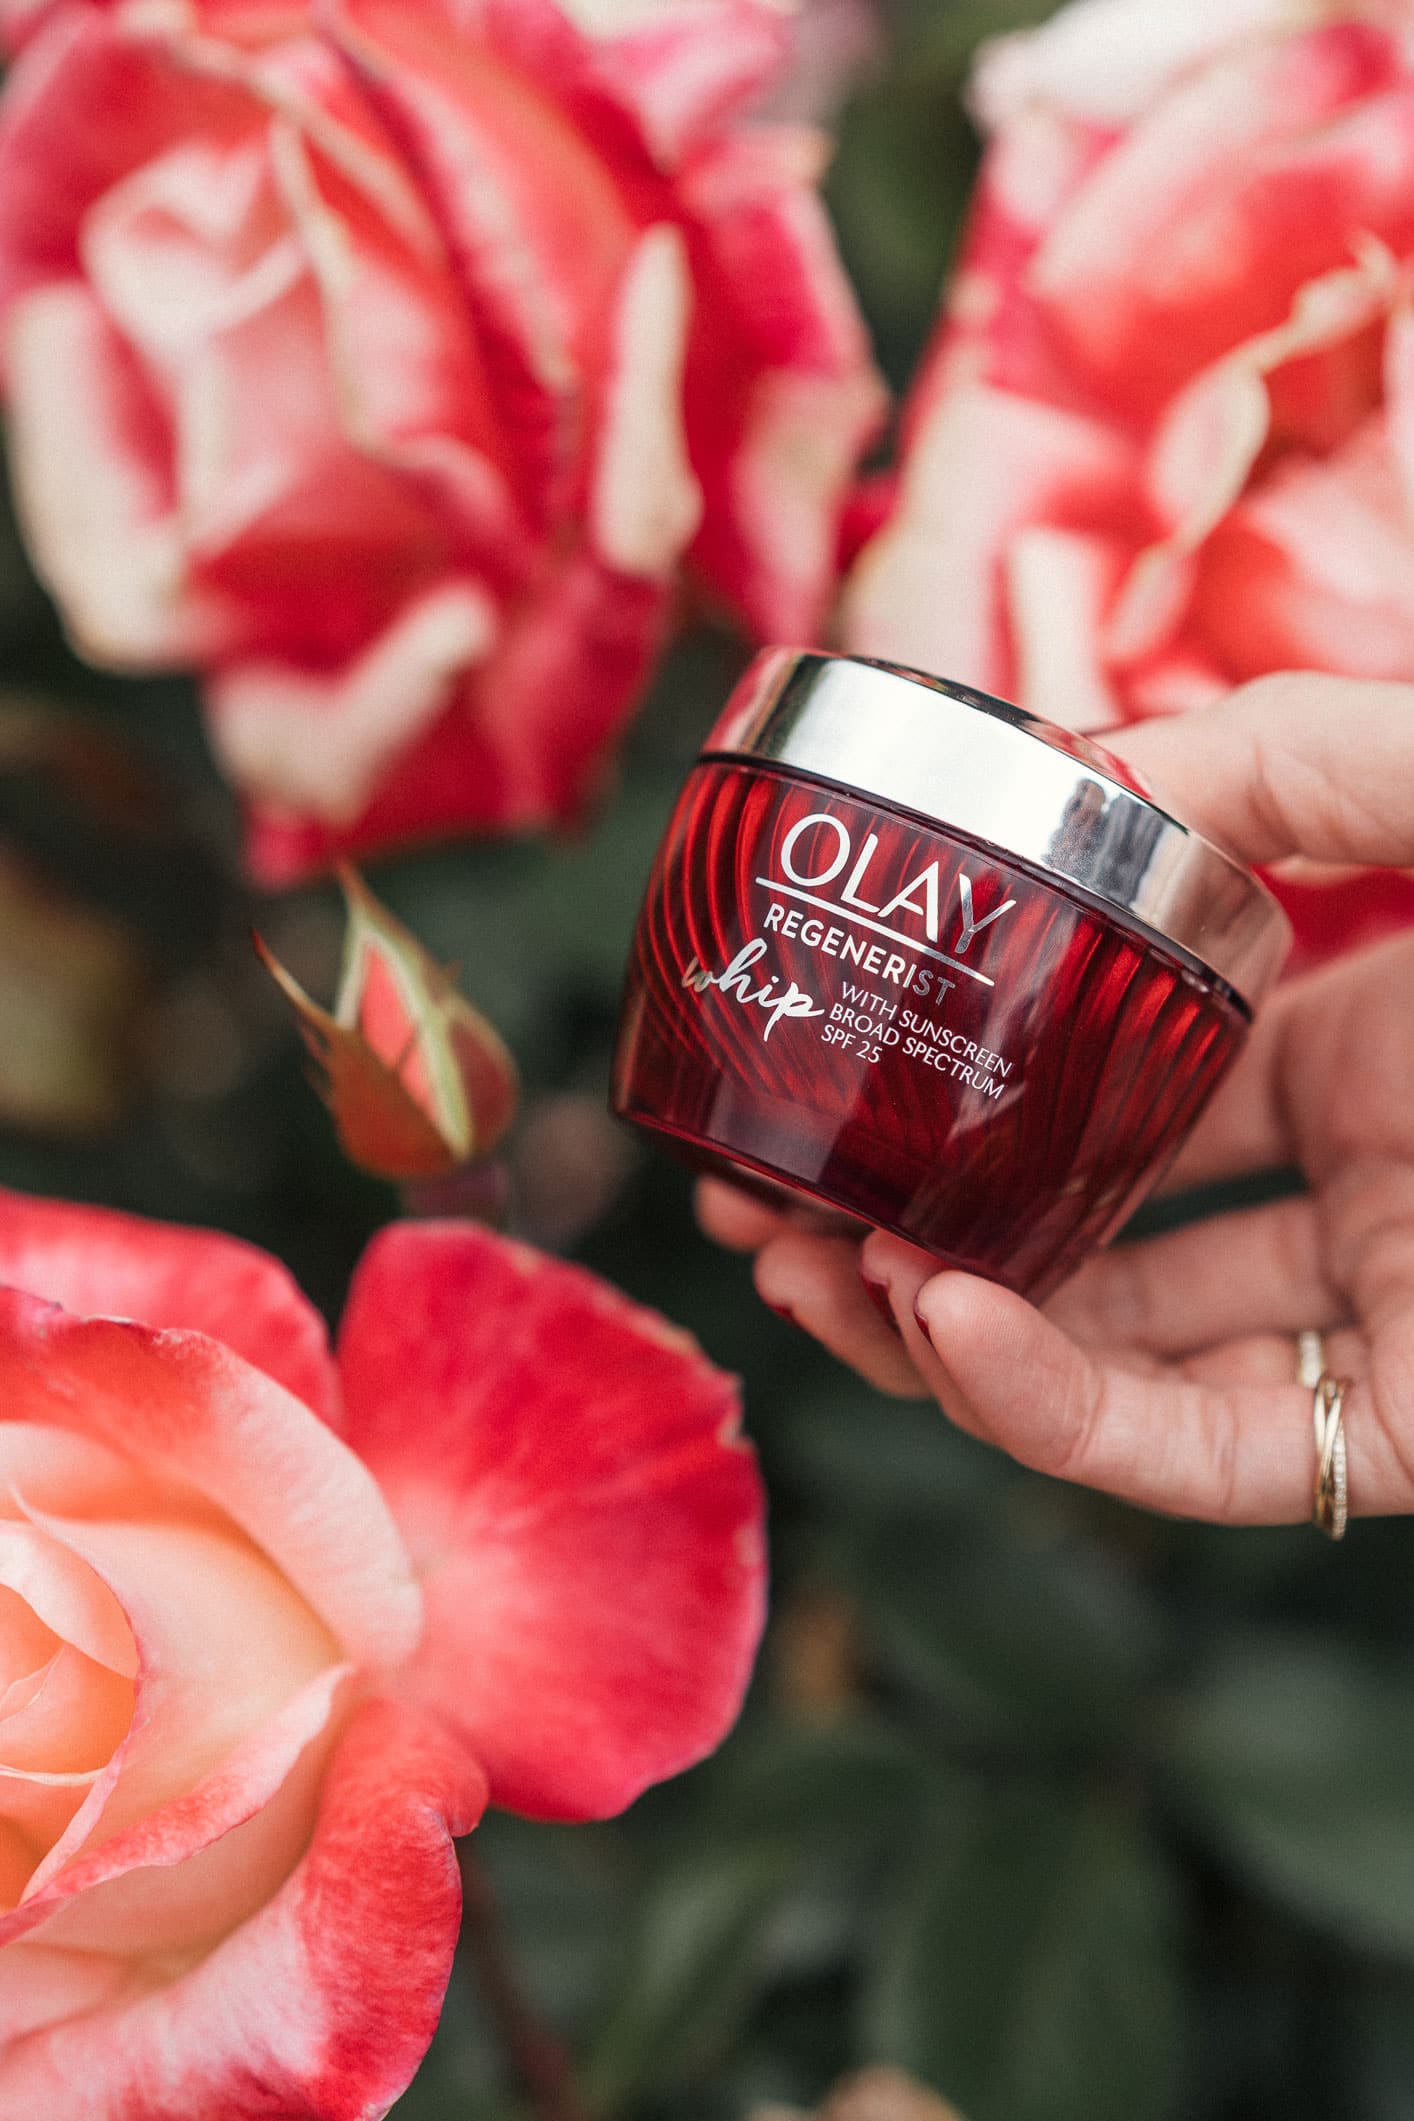 Louise Roe of Front Roe gives her 5 self care practices featuring Olay Whip SPF